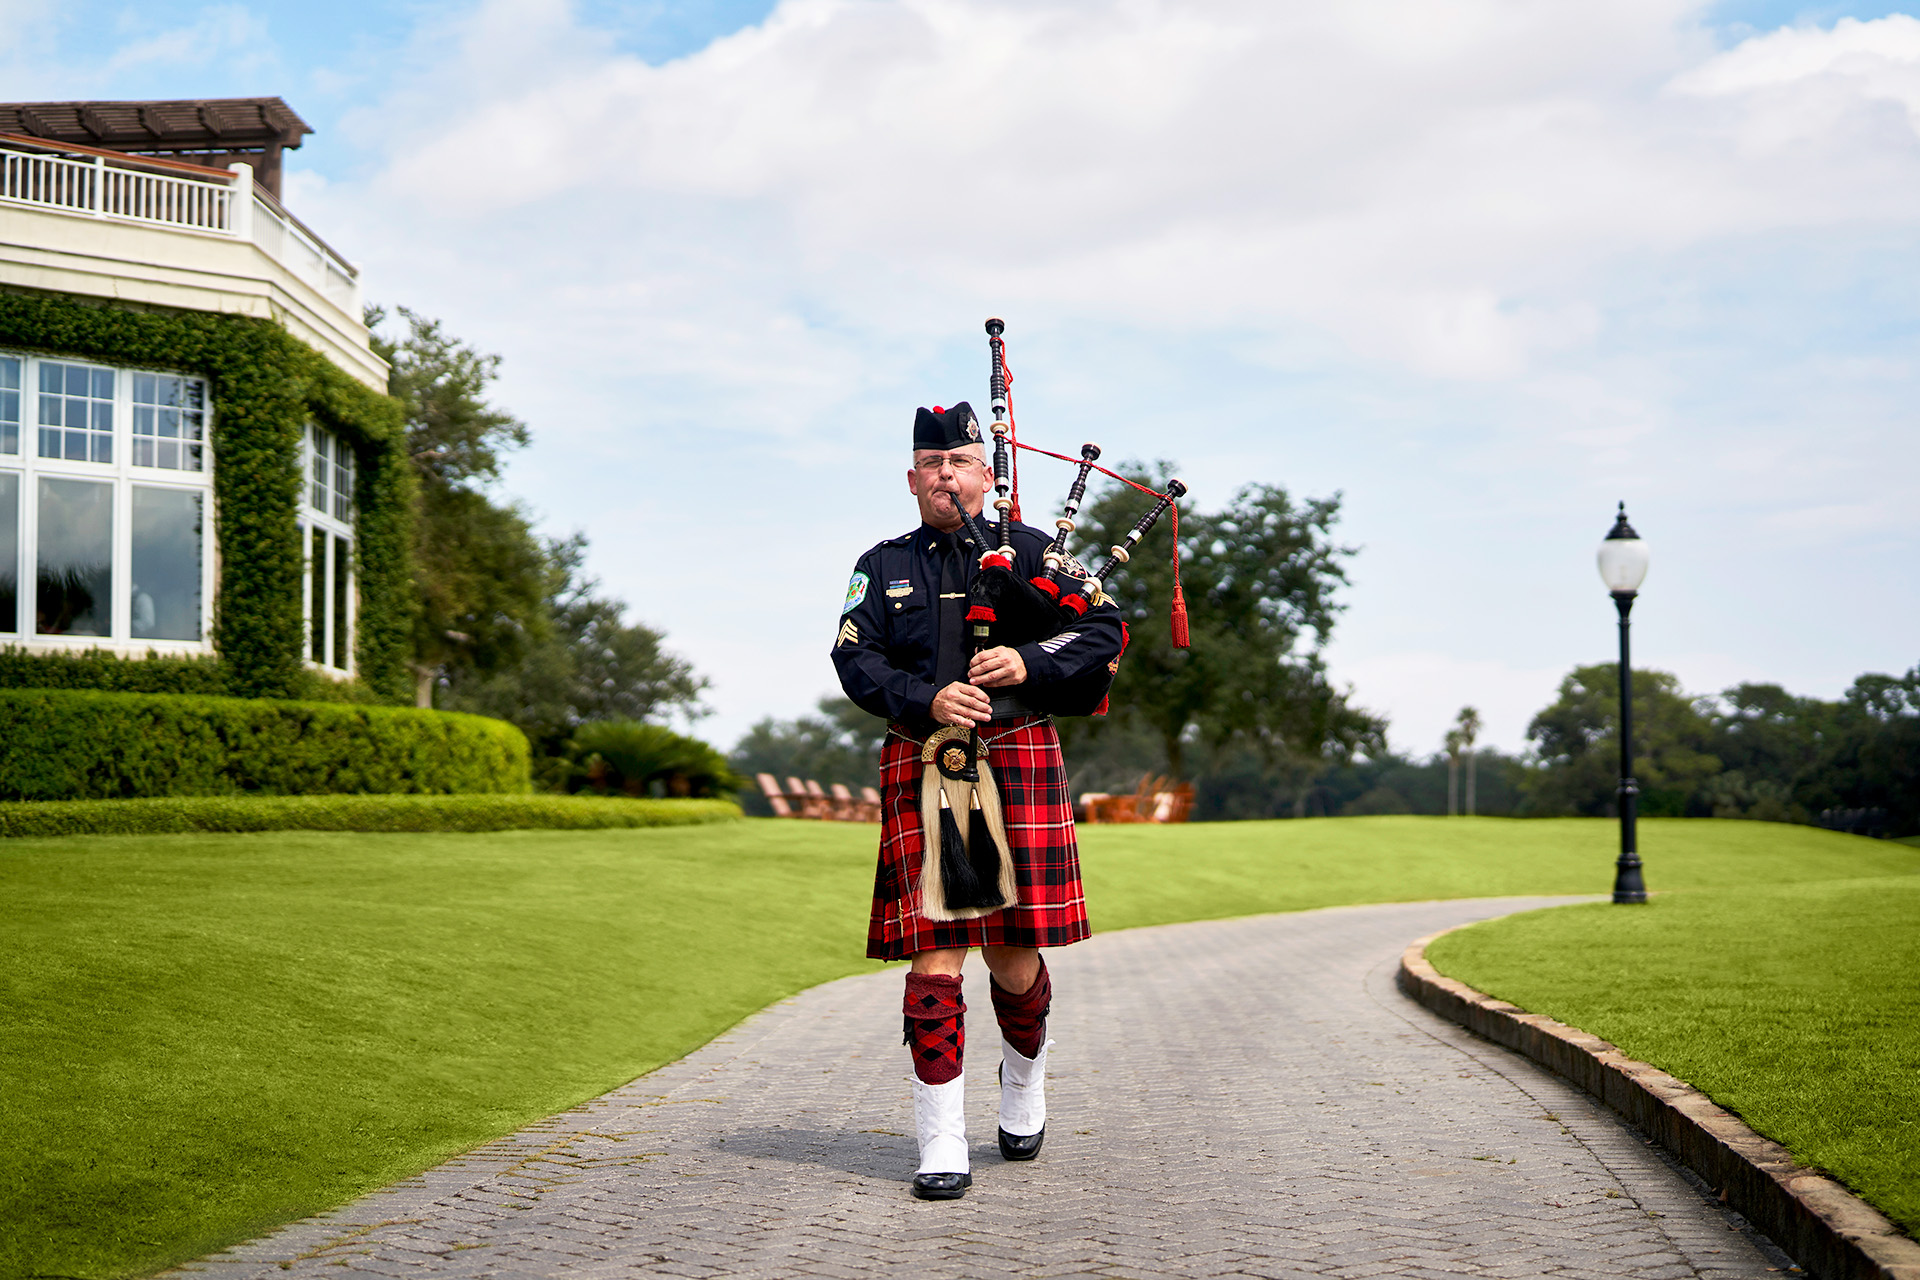 The Yorkshire Piper - Bagpiper for hire - Weddings, Funerals